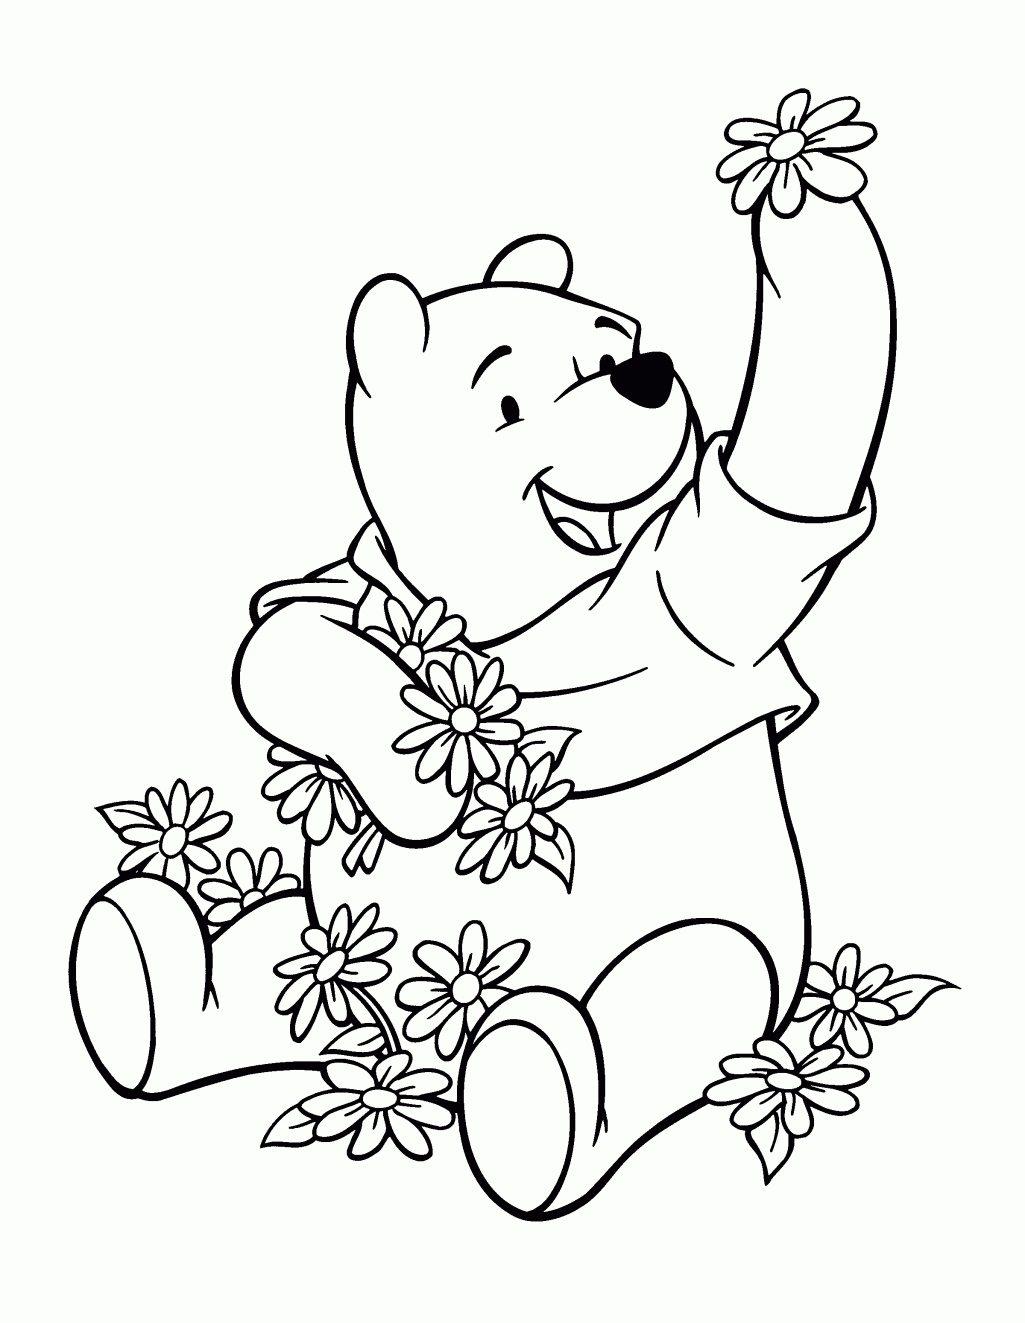 Coloring Disney 2 On Pinterest Disney Coloring Pages Coloring ...